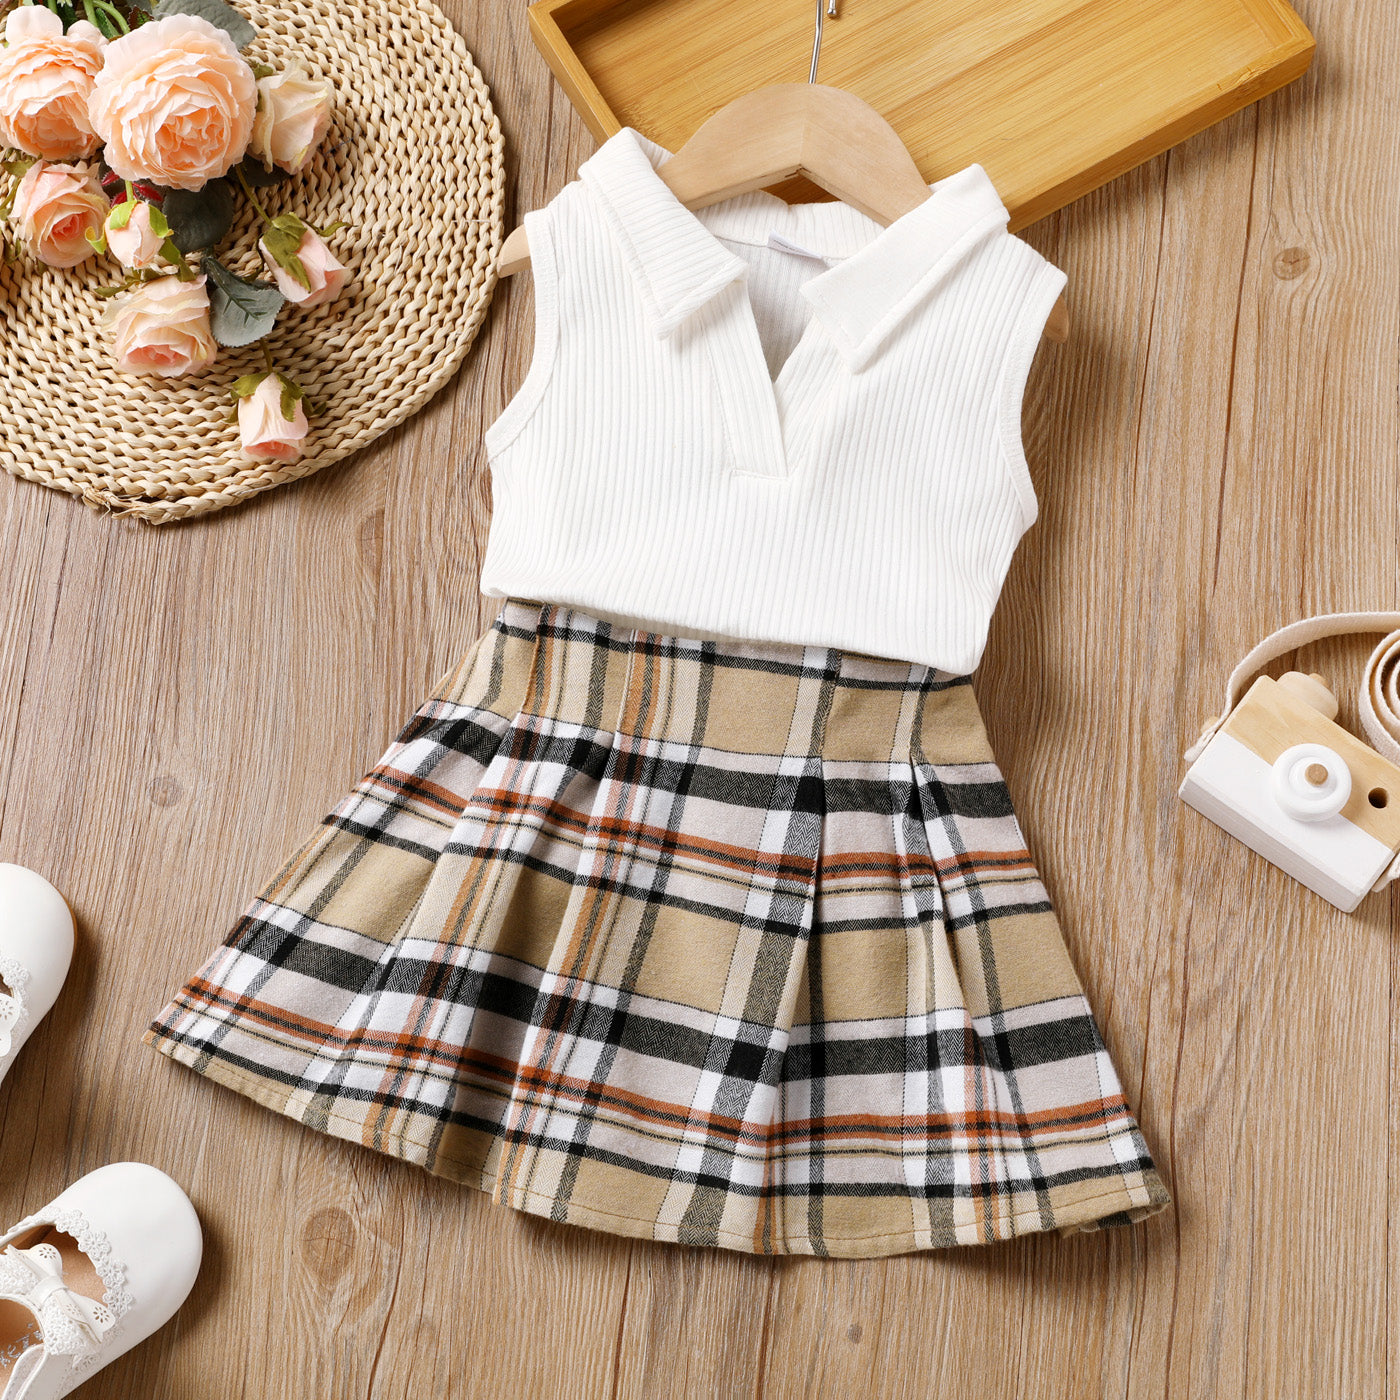 2pcs Toddler Girl Preppy style Lapel Collar Sleeveless Tee and Plaid Pleated Skirt Set